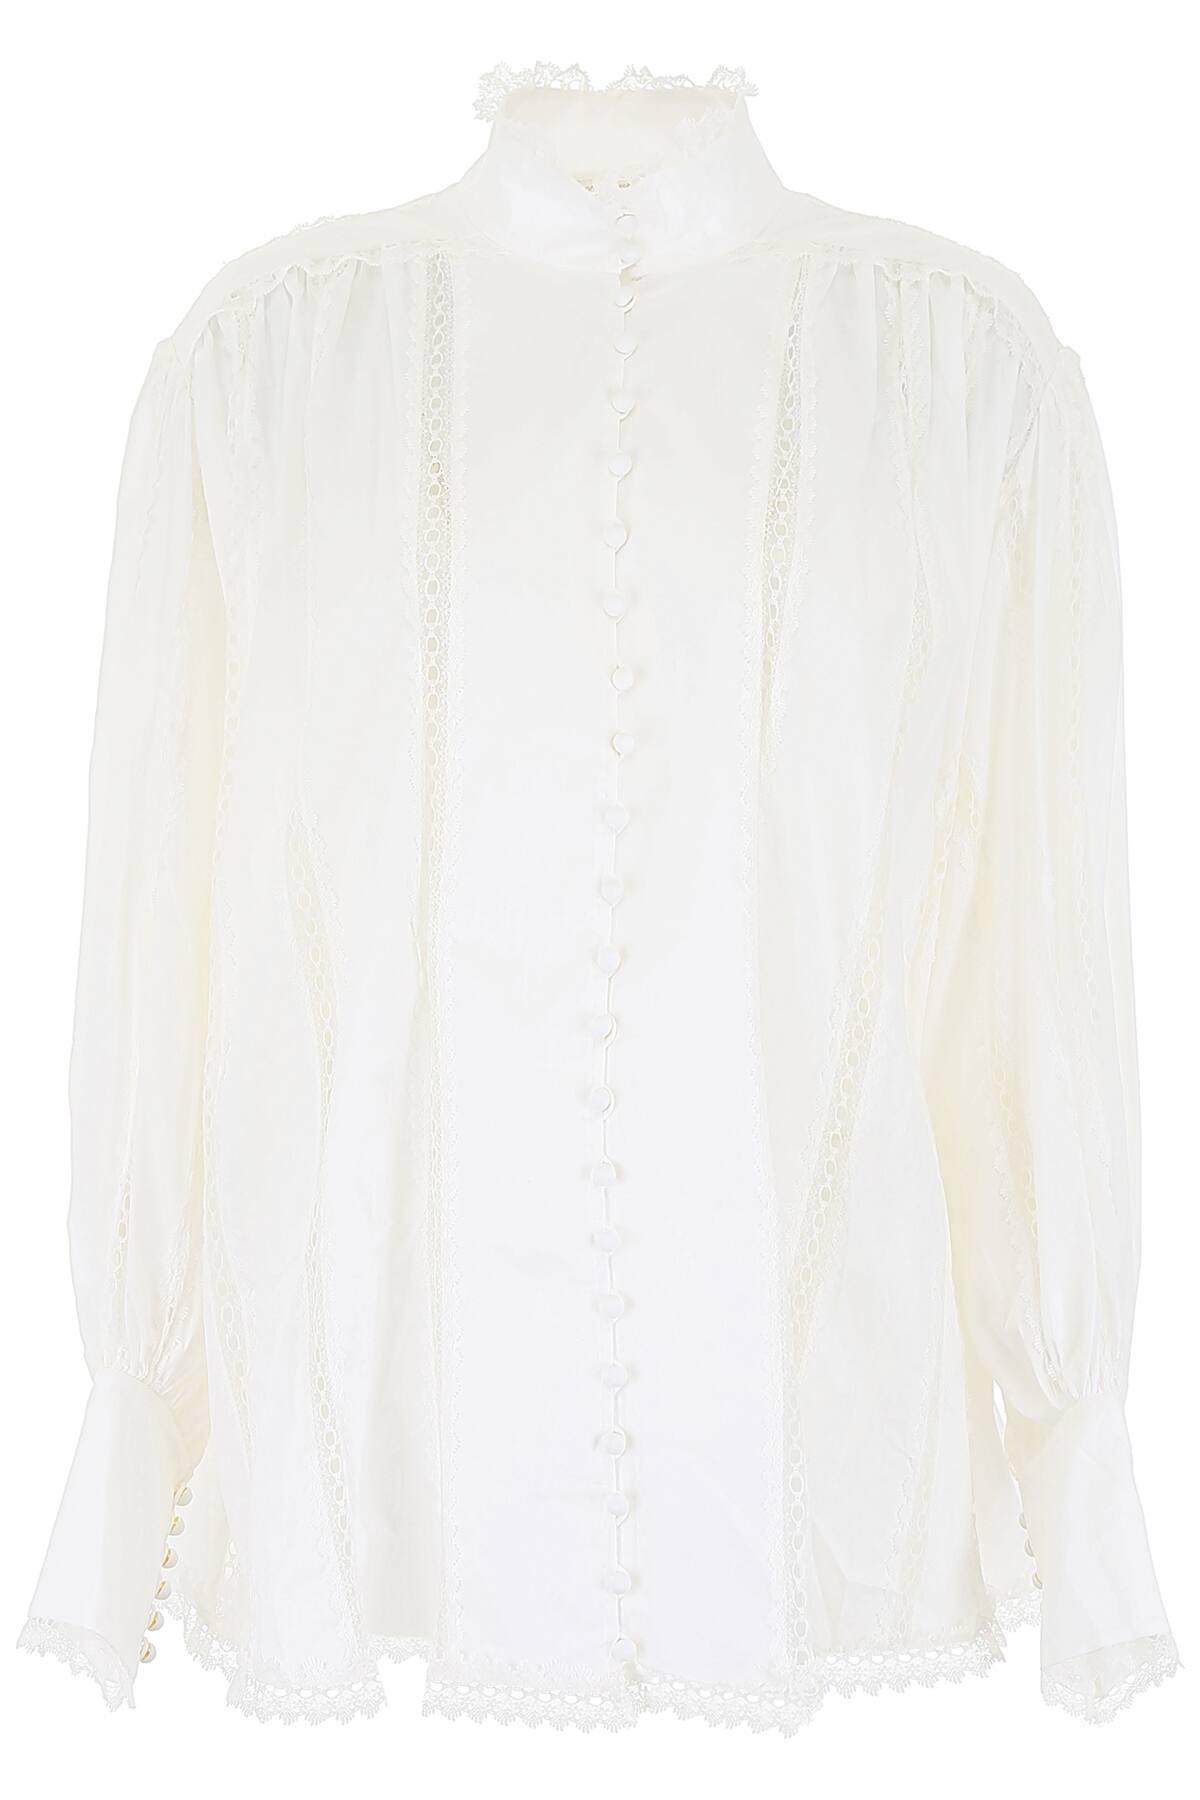 Zimmermann Shirt With Lace Inserts in White - Lyst